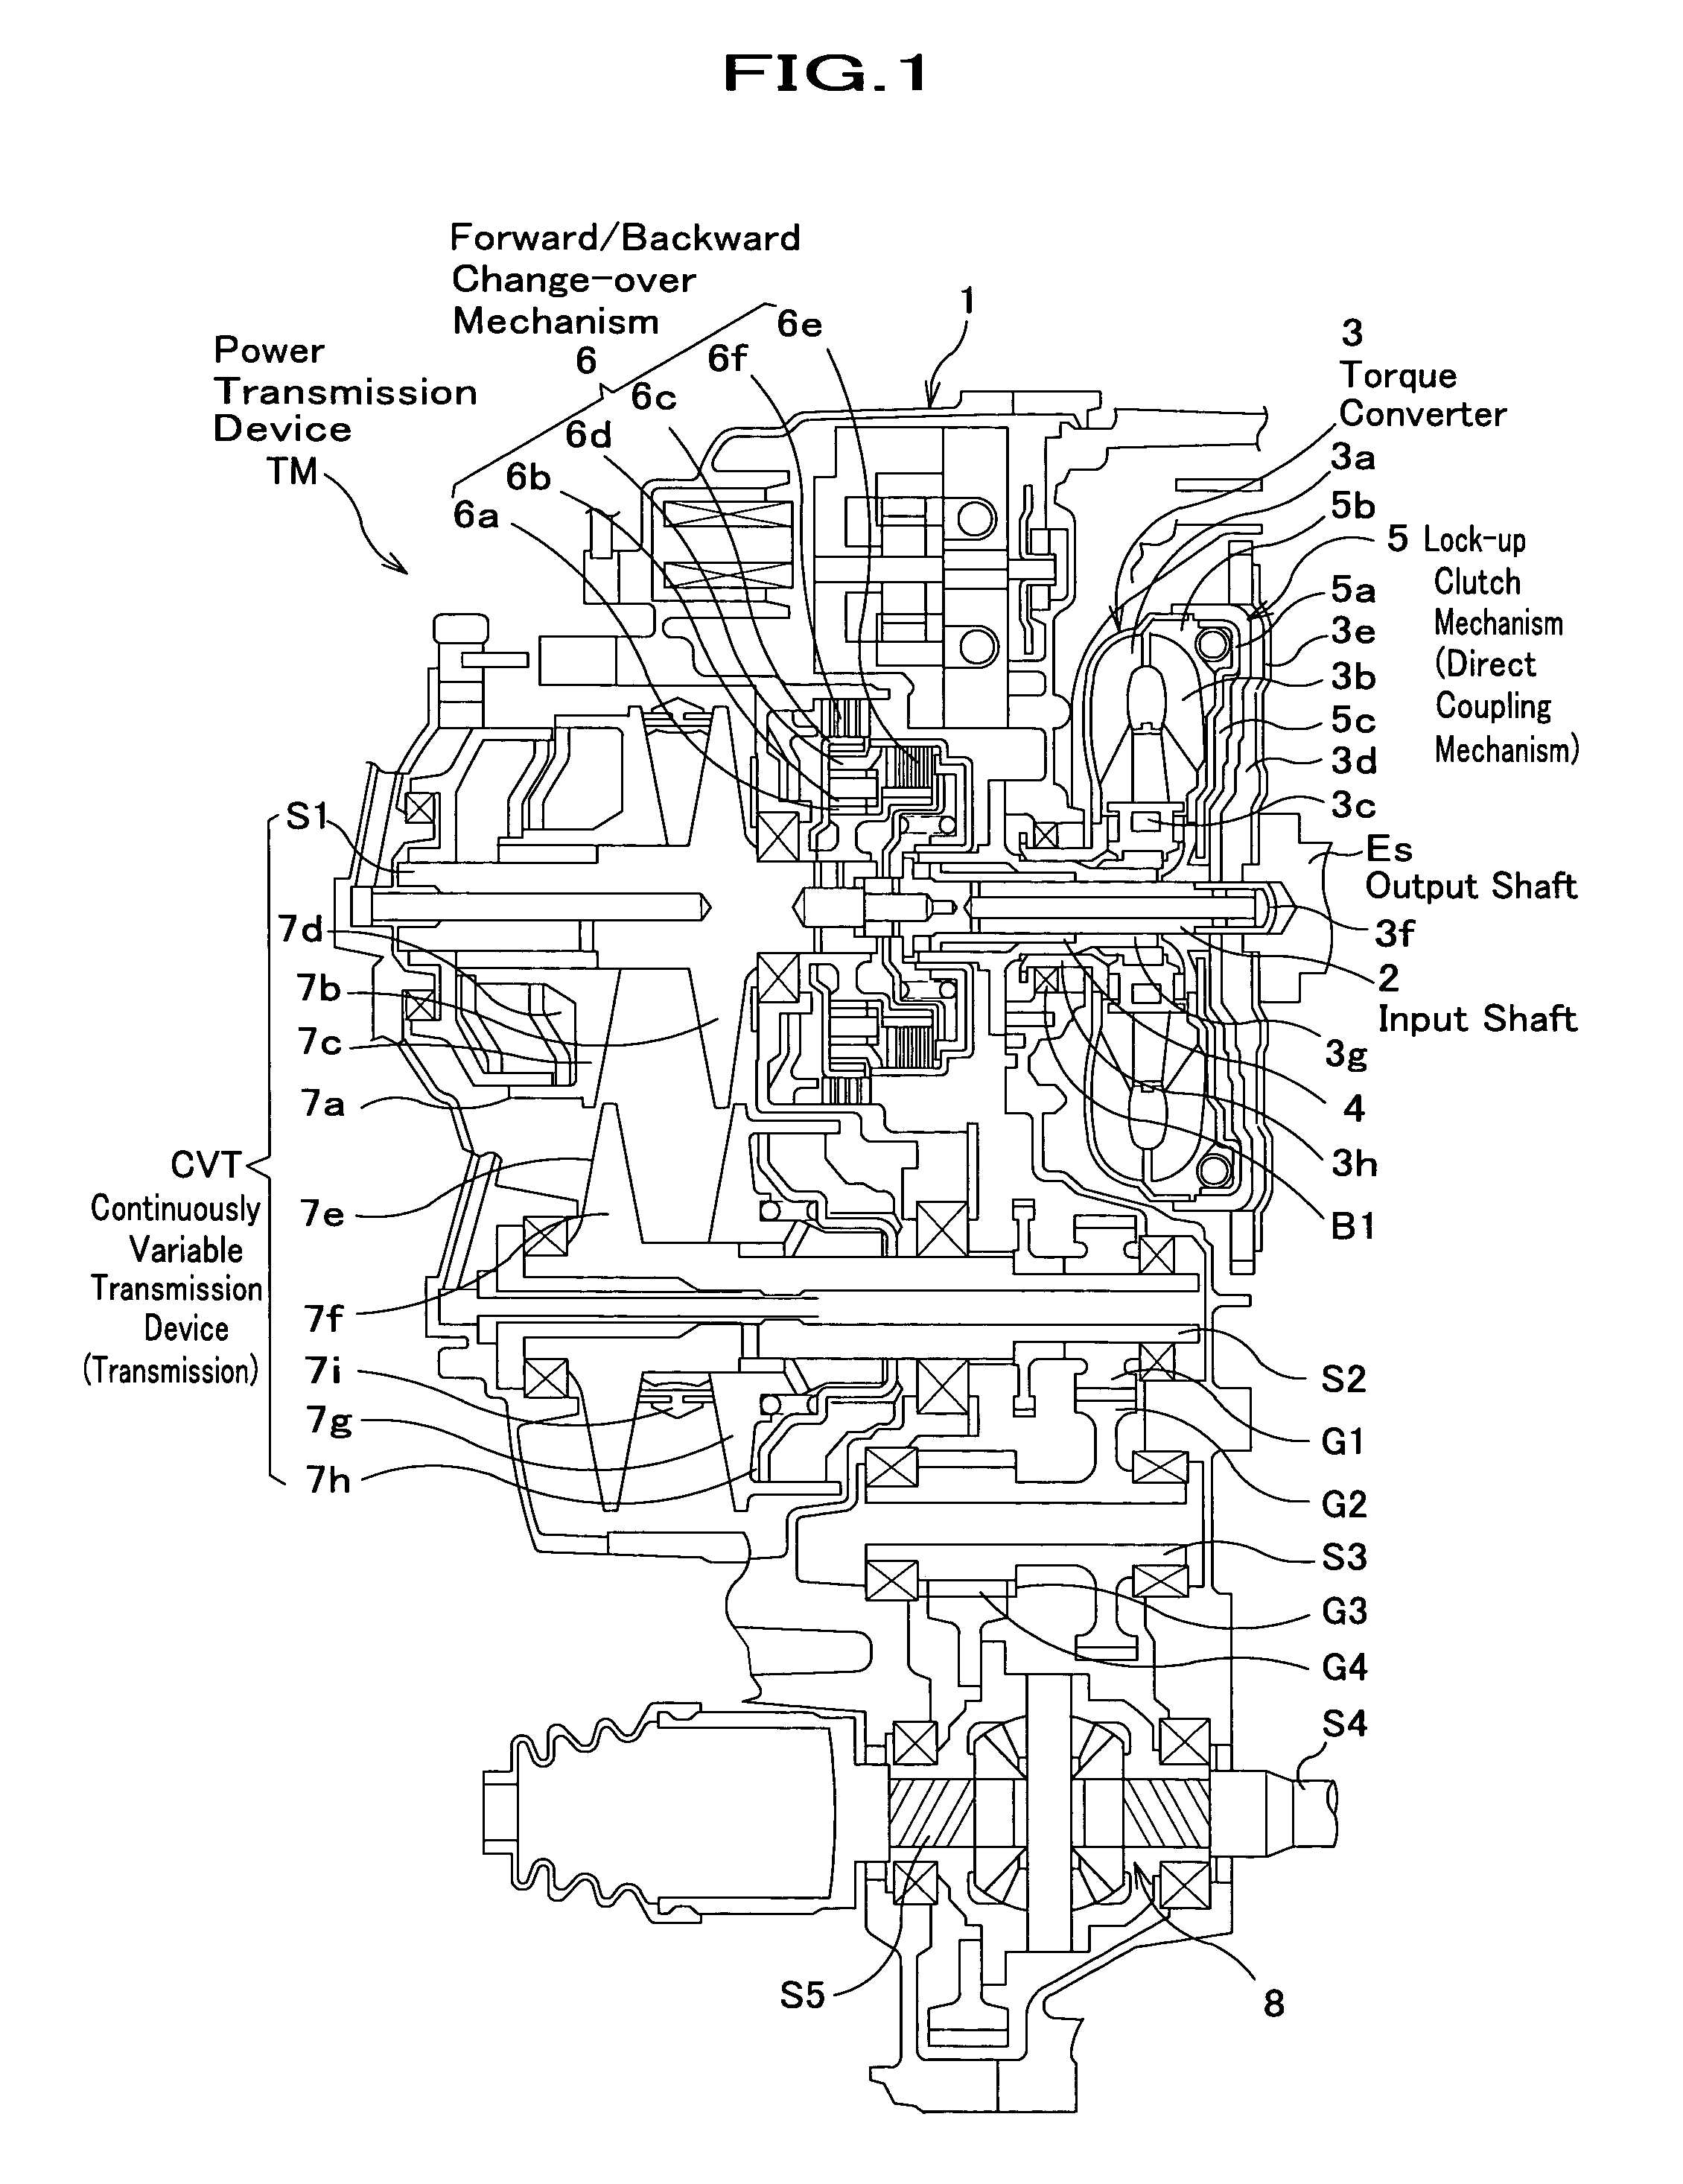 Hydraulic controller of power transmission device